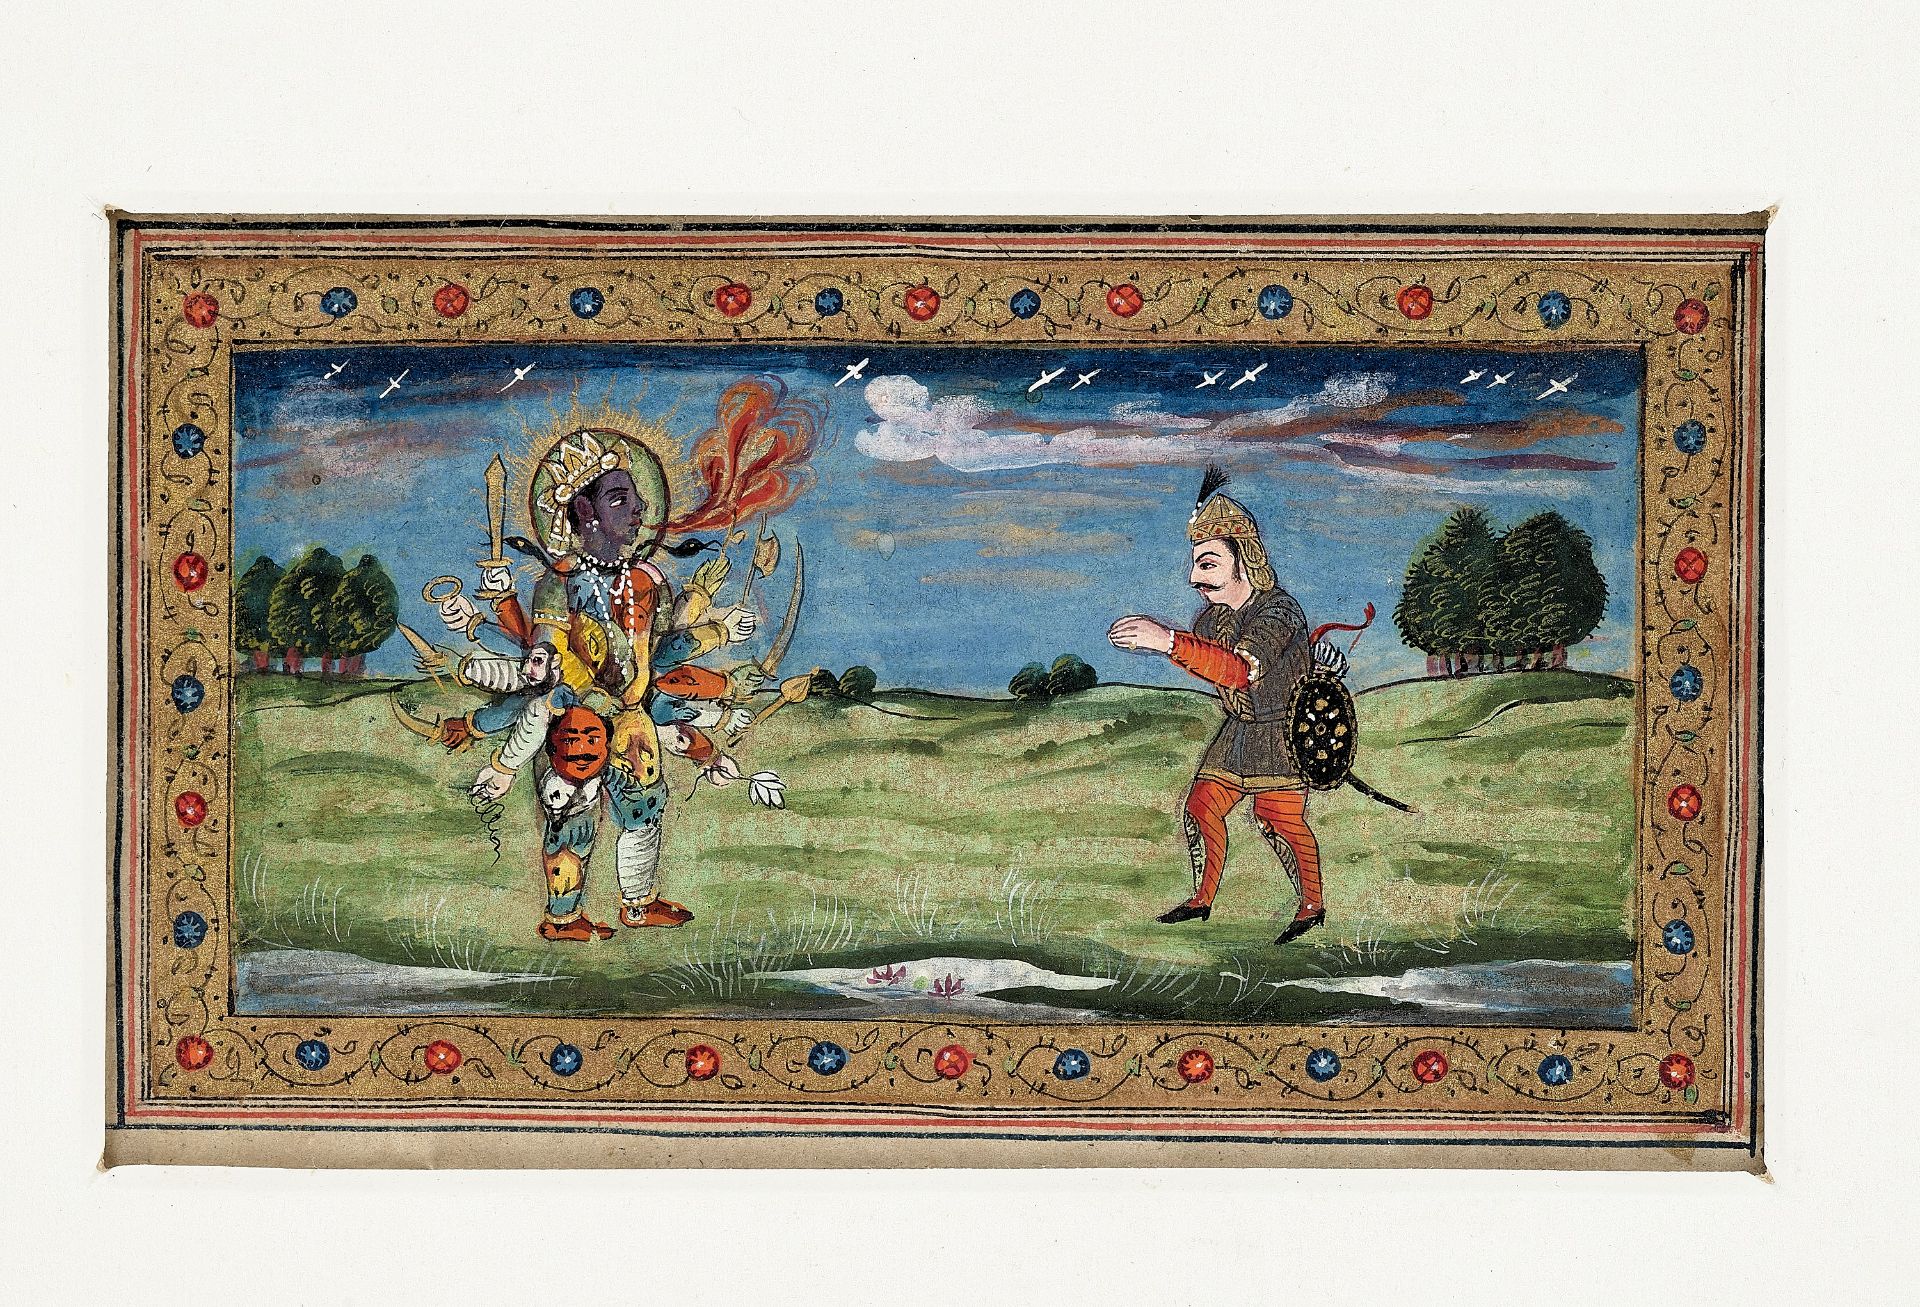 A RARE GROUP OF 27 FOLIOS FROM A MANUSCRIPT, KASHMIR 18TH CENTURY - Image 2 of 15